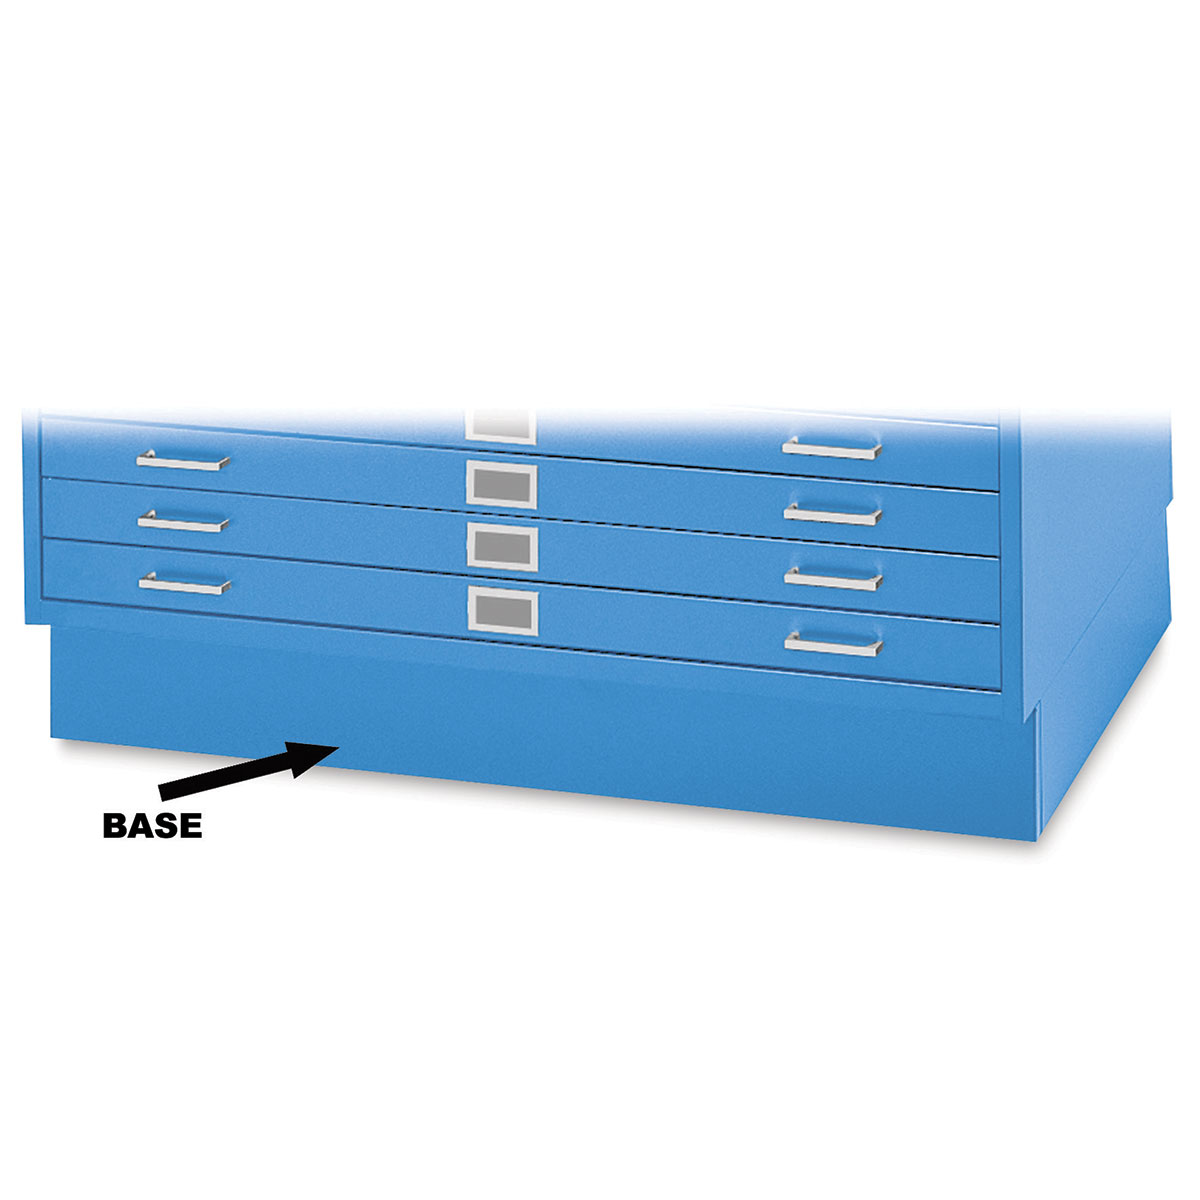 Mayline Stacor Cole, Safco Flat File Cabinet 5 Drawers for Drawings, Maps,  Blueprints serviced -  Denmark